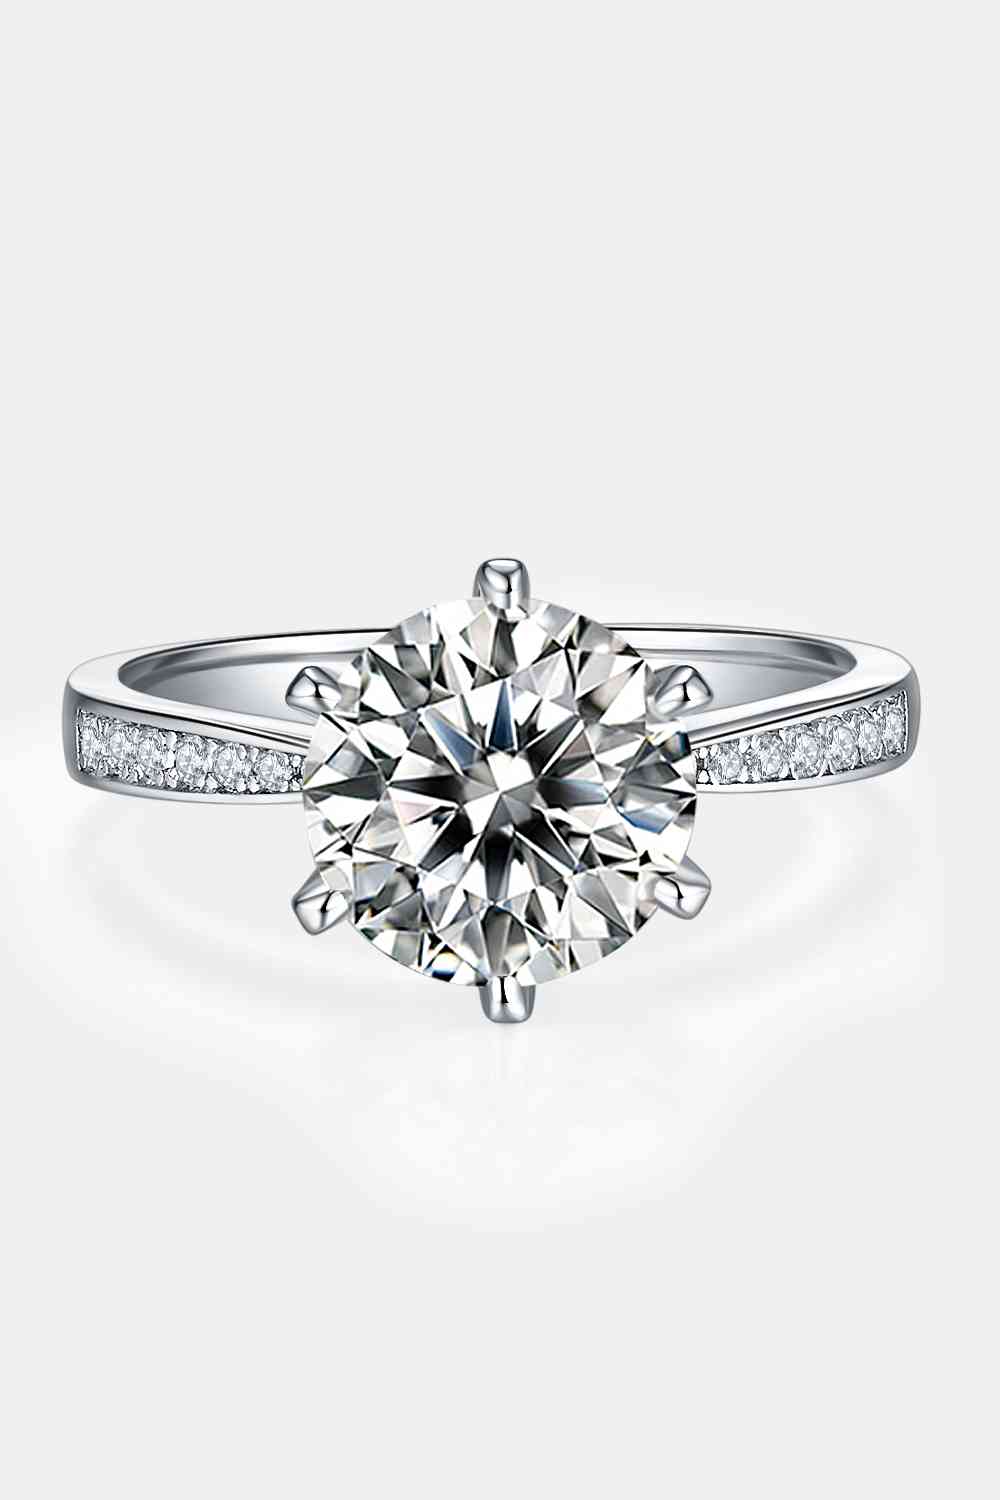 3 Carat Moissanite Side Stone Ring - Shop Tophatter Deals, Electronics, Fashion, Jewelry, Health, Beauty, Home Decor, Free Shipping